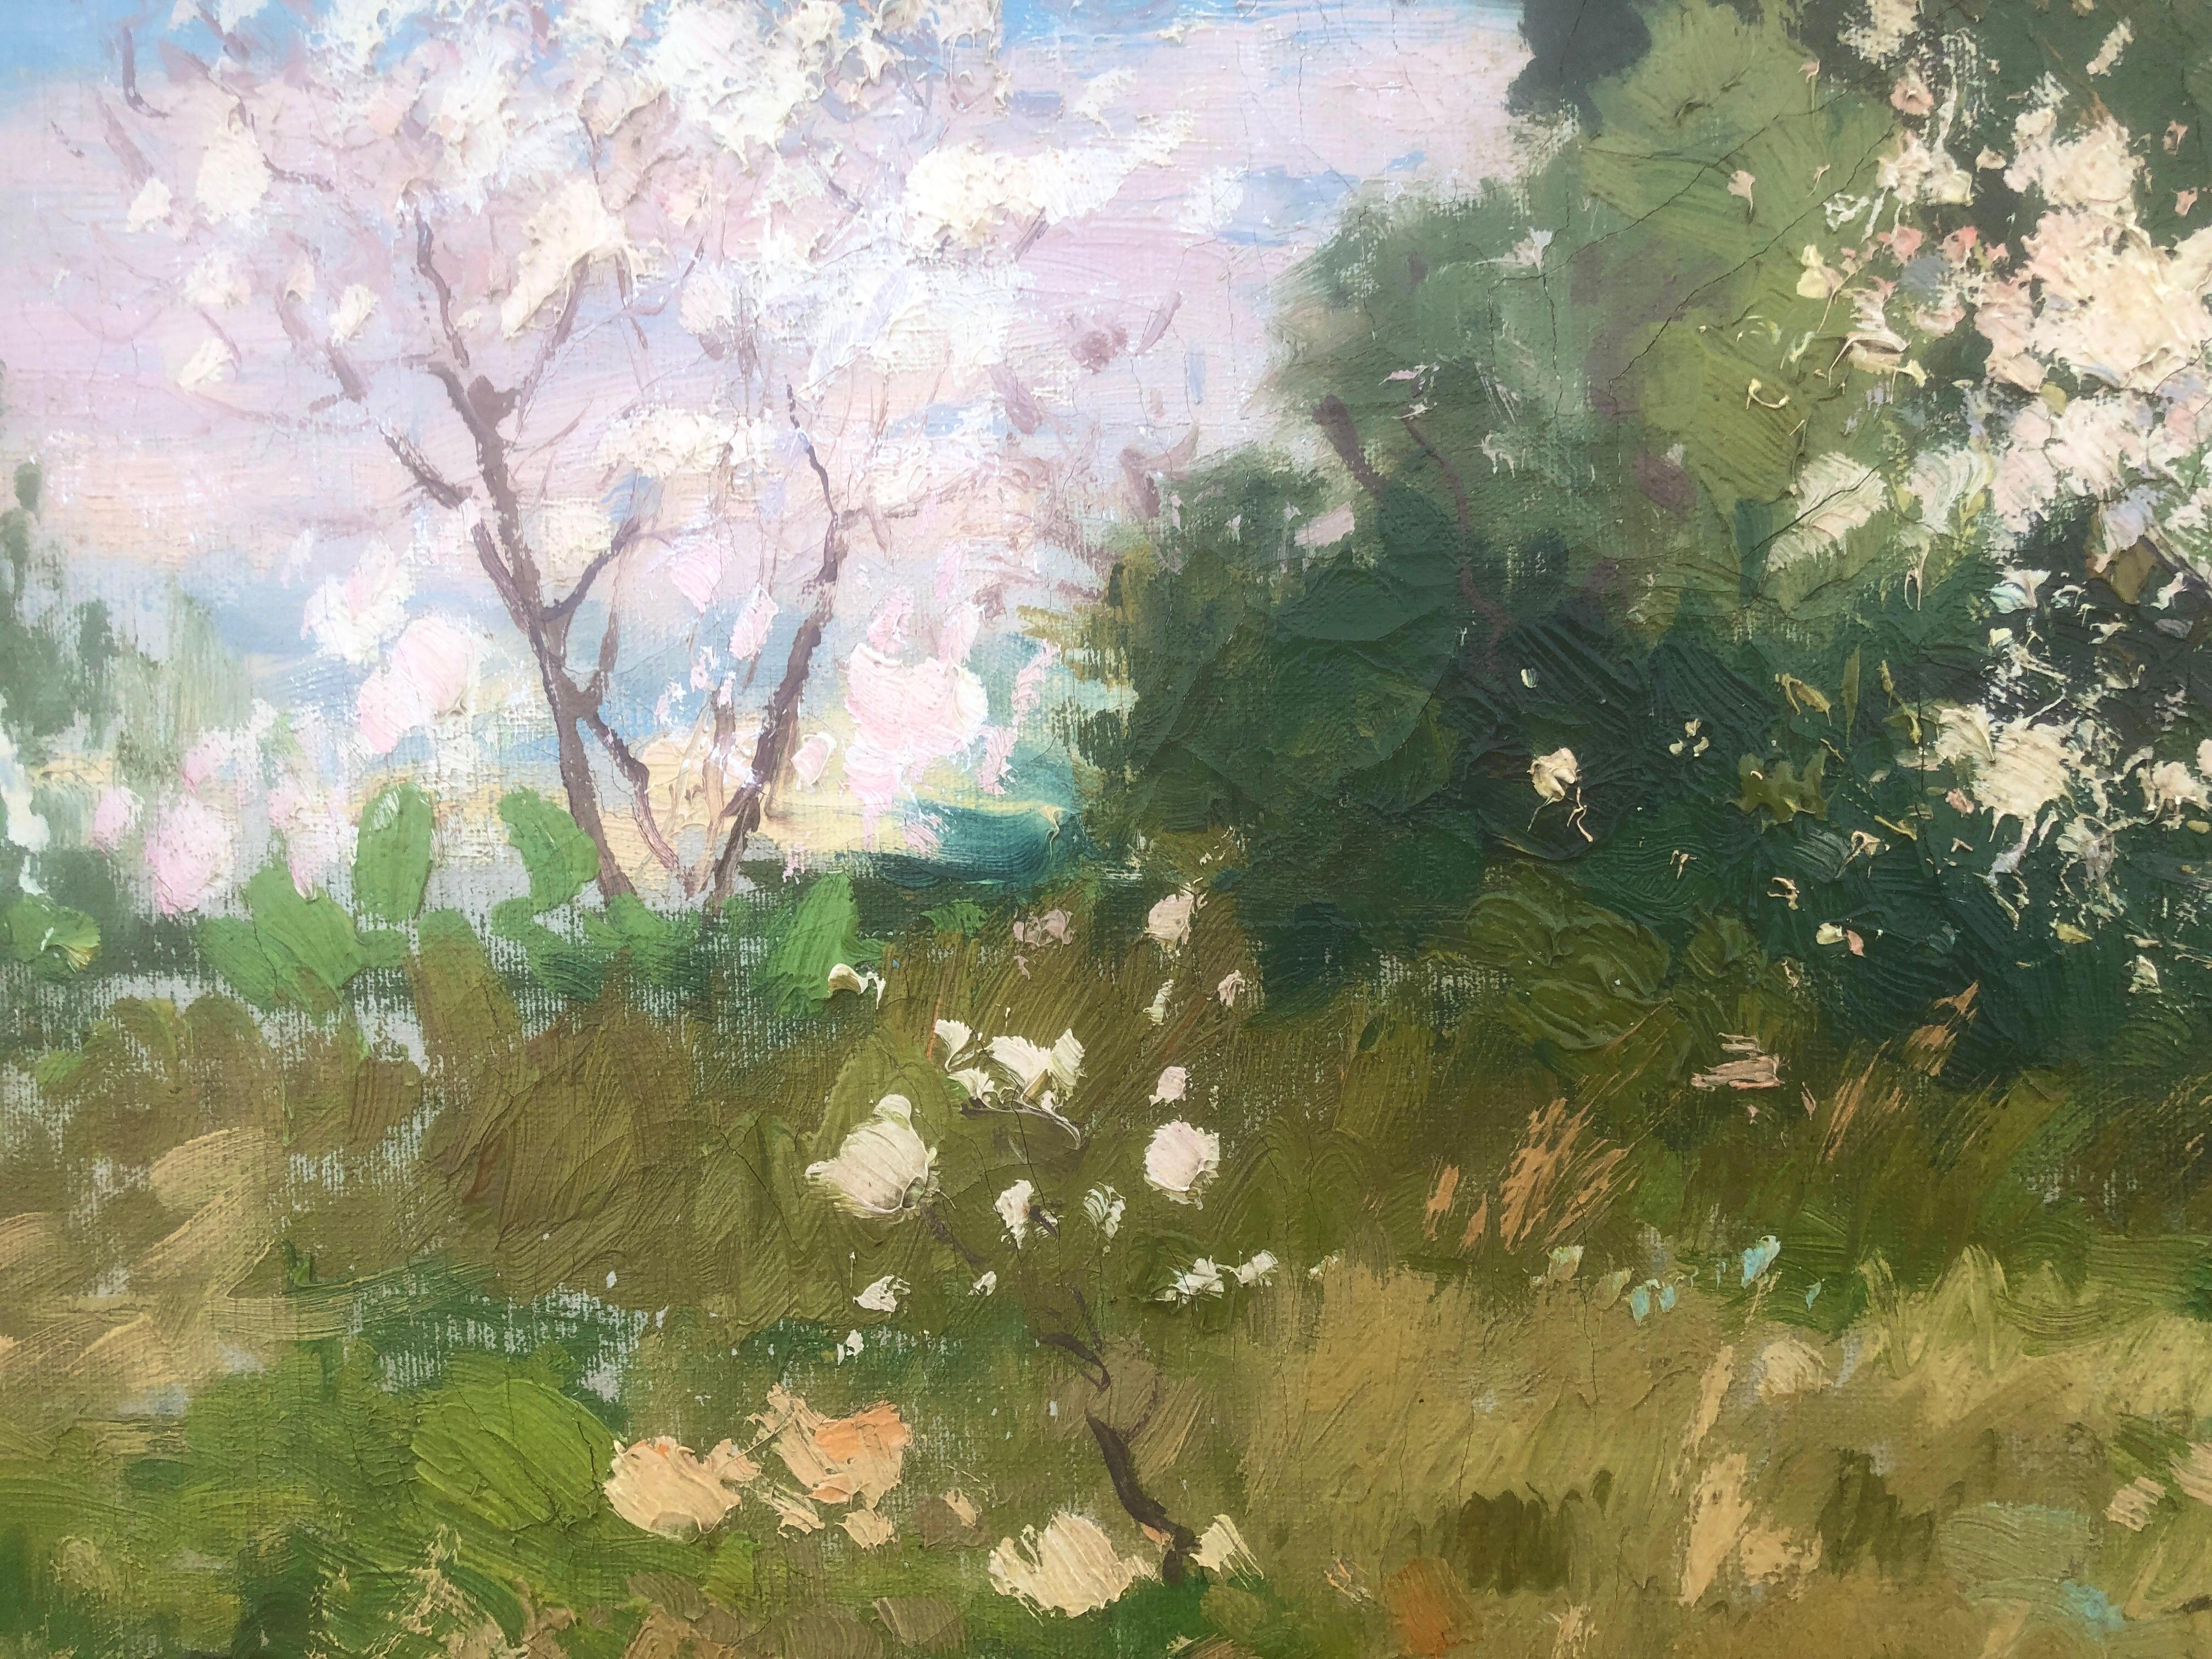 José Miret Aleu (1912-1999) - Almond trees in bloom Mallorca - Oil on canvas
Oil measurements 46x55 cm.
Frameless.

Painter born in Barcelona in 1912. He studied drawing at the Baixas Academy in Barcelona and learned the trade of ceramics. In 1944